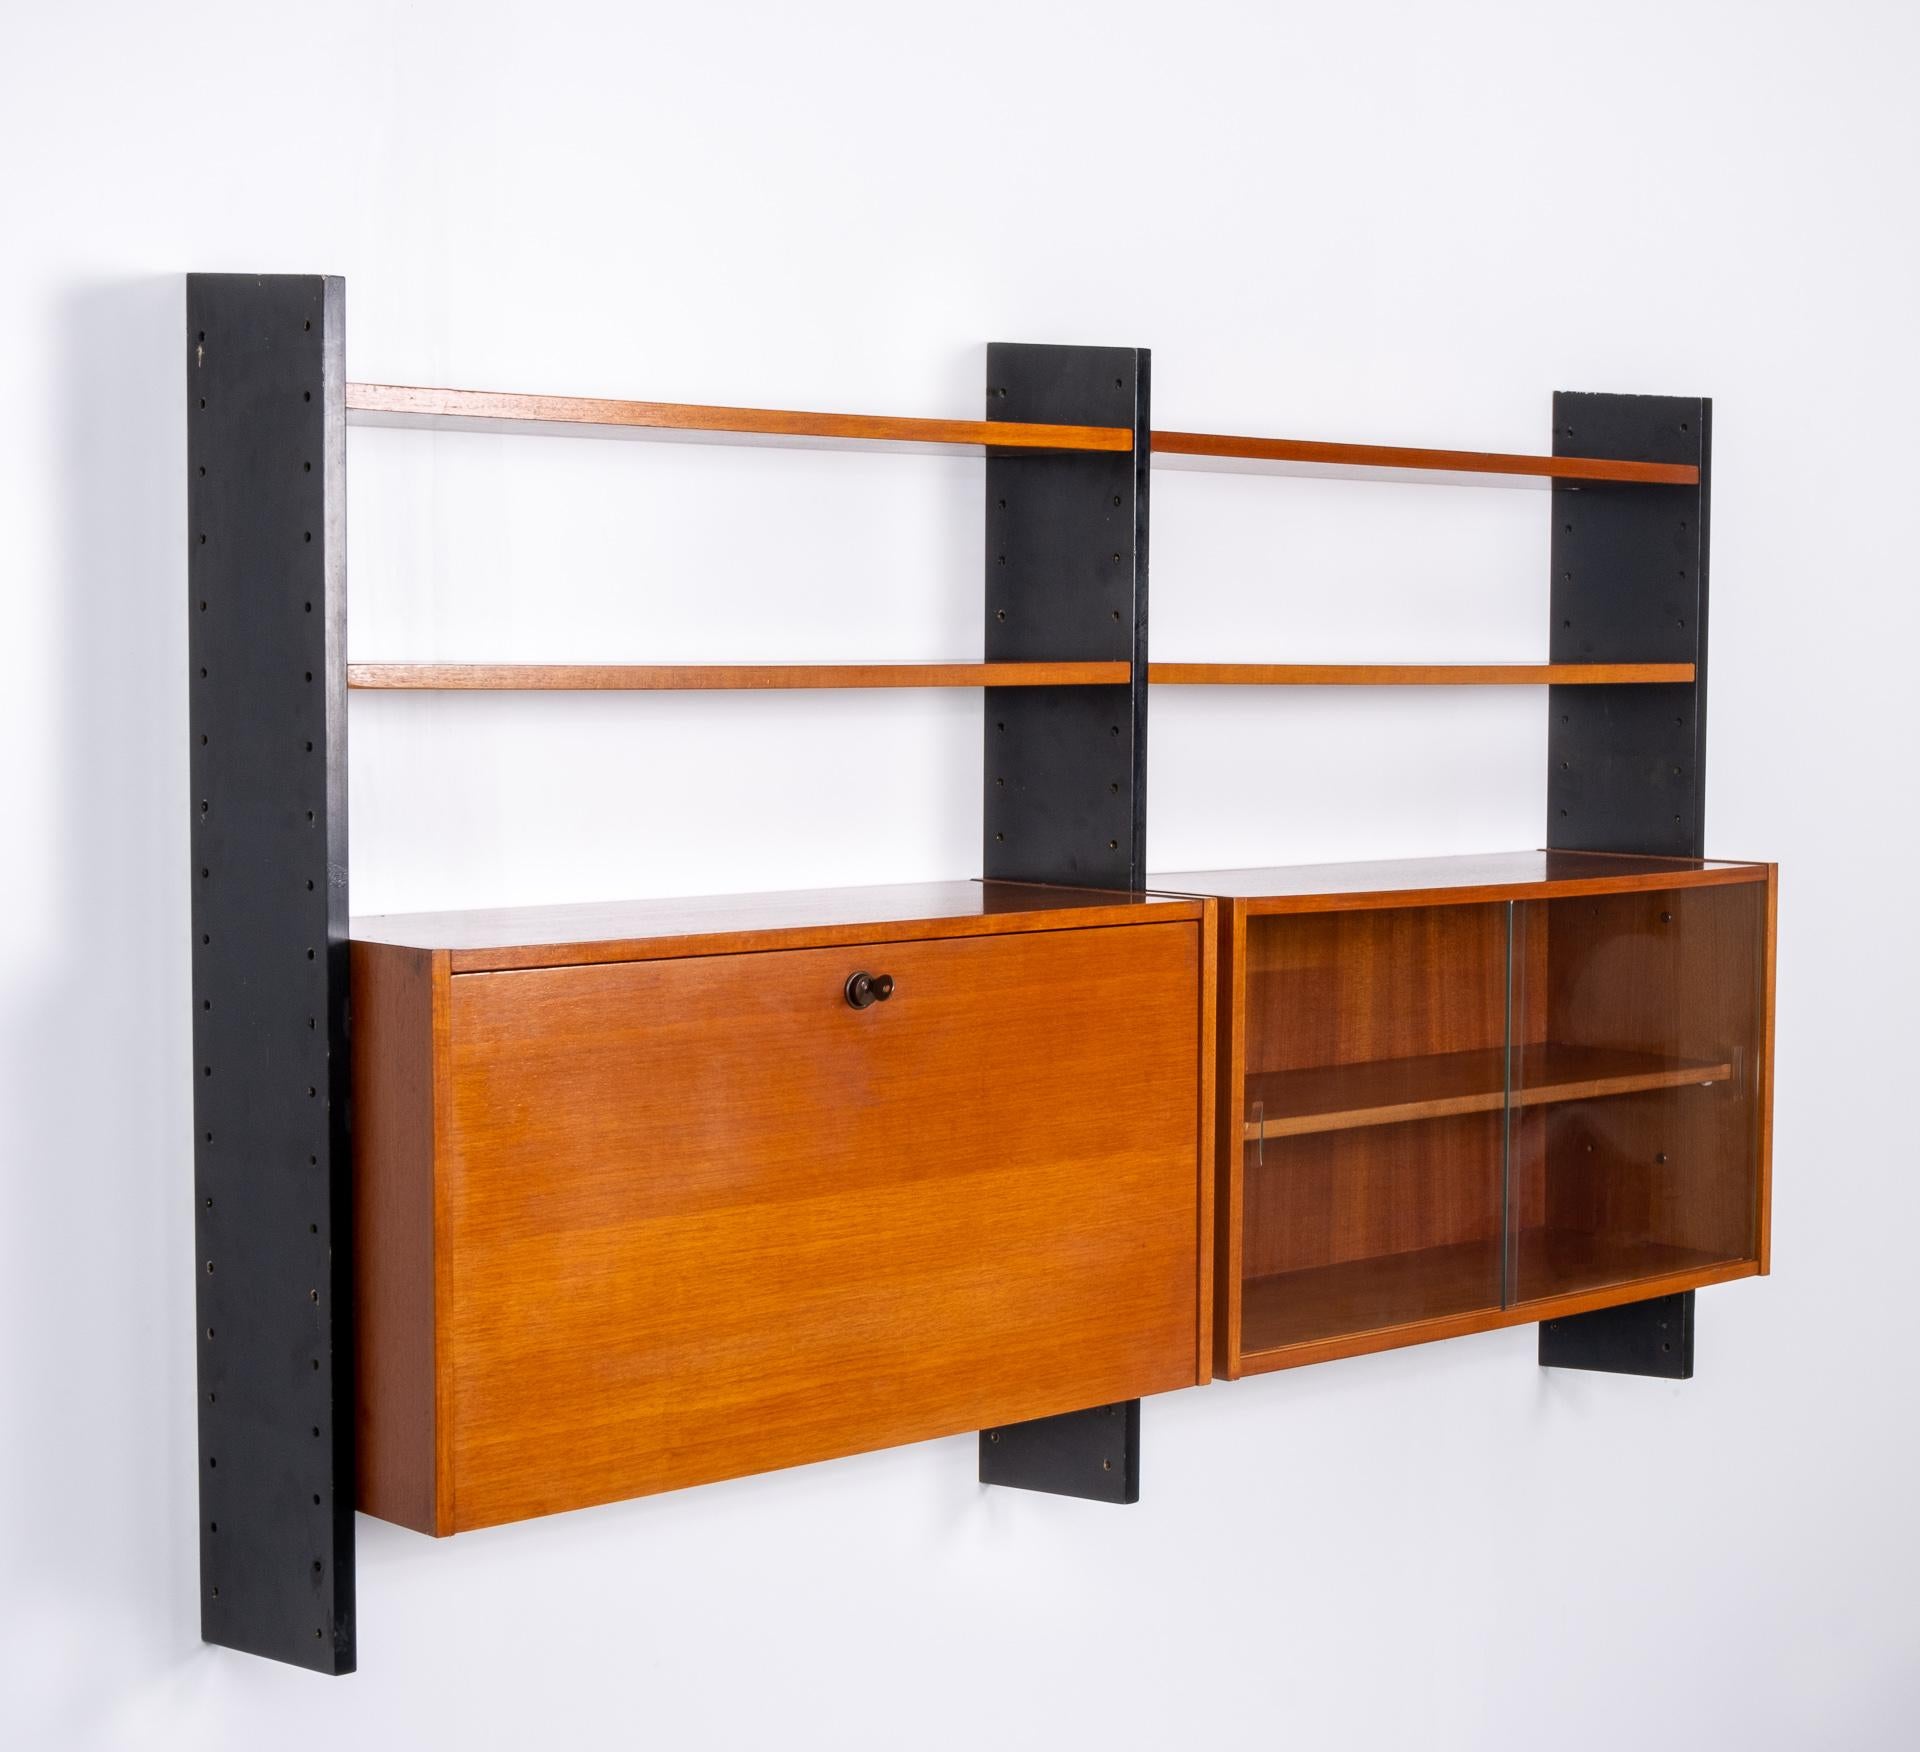 Very nice wall system. Produced by Formule Kempes meubelen Waddinxveen Holland, 1960s.
Three black uprights. With 4 teak wood shelves. And two cabinets, one with glass sliding doors and one with a valve secretary comes with 3 little drawers and a